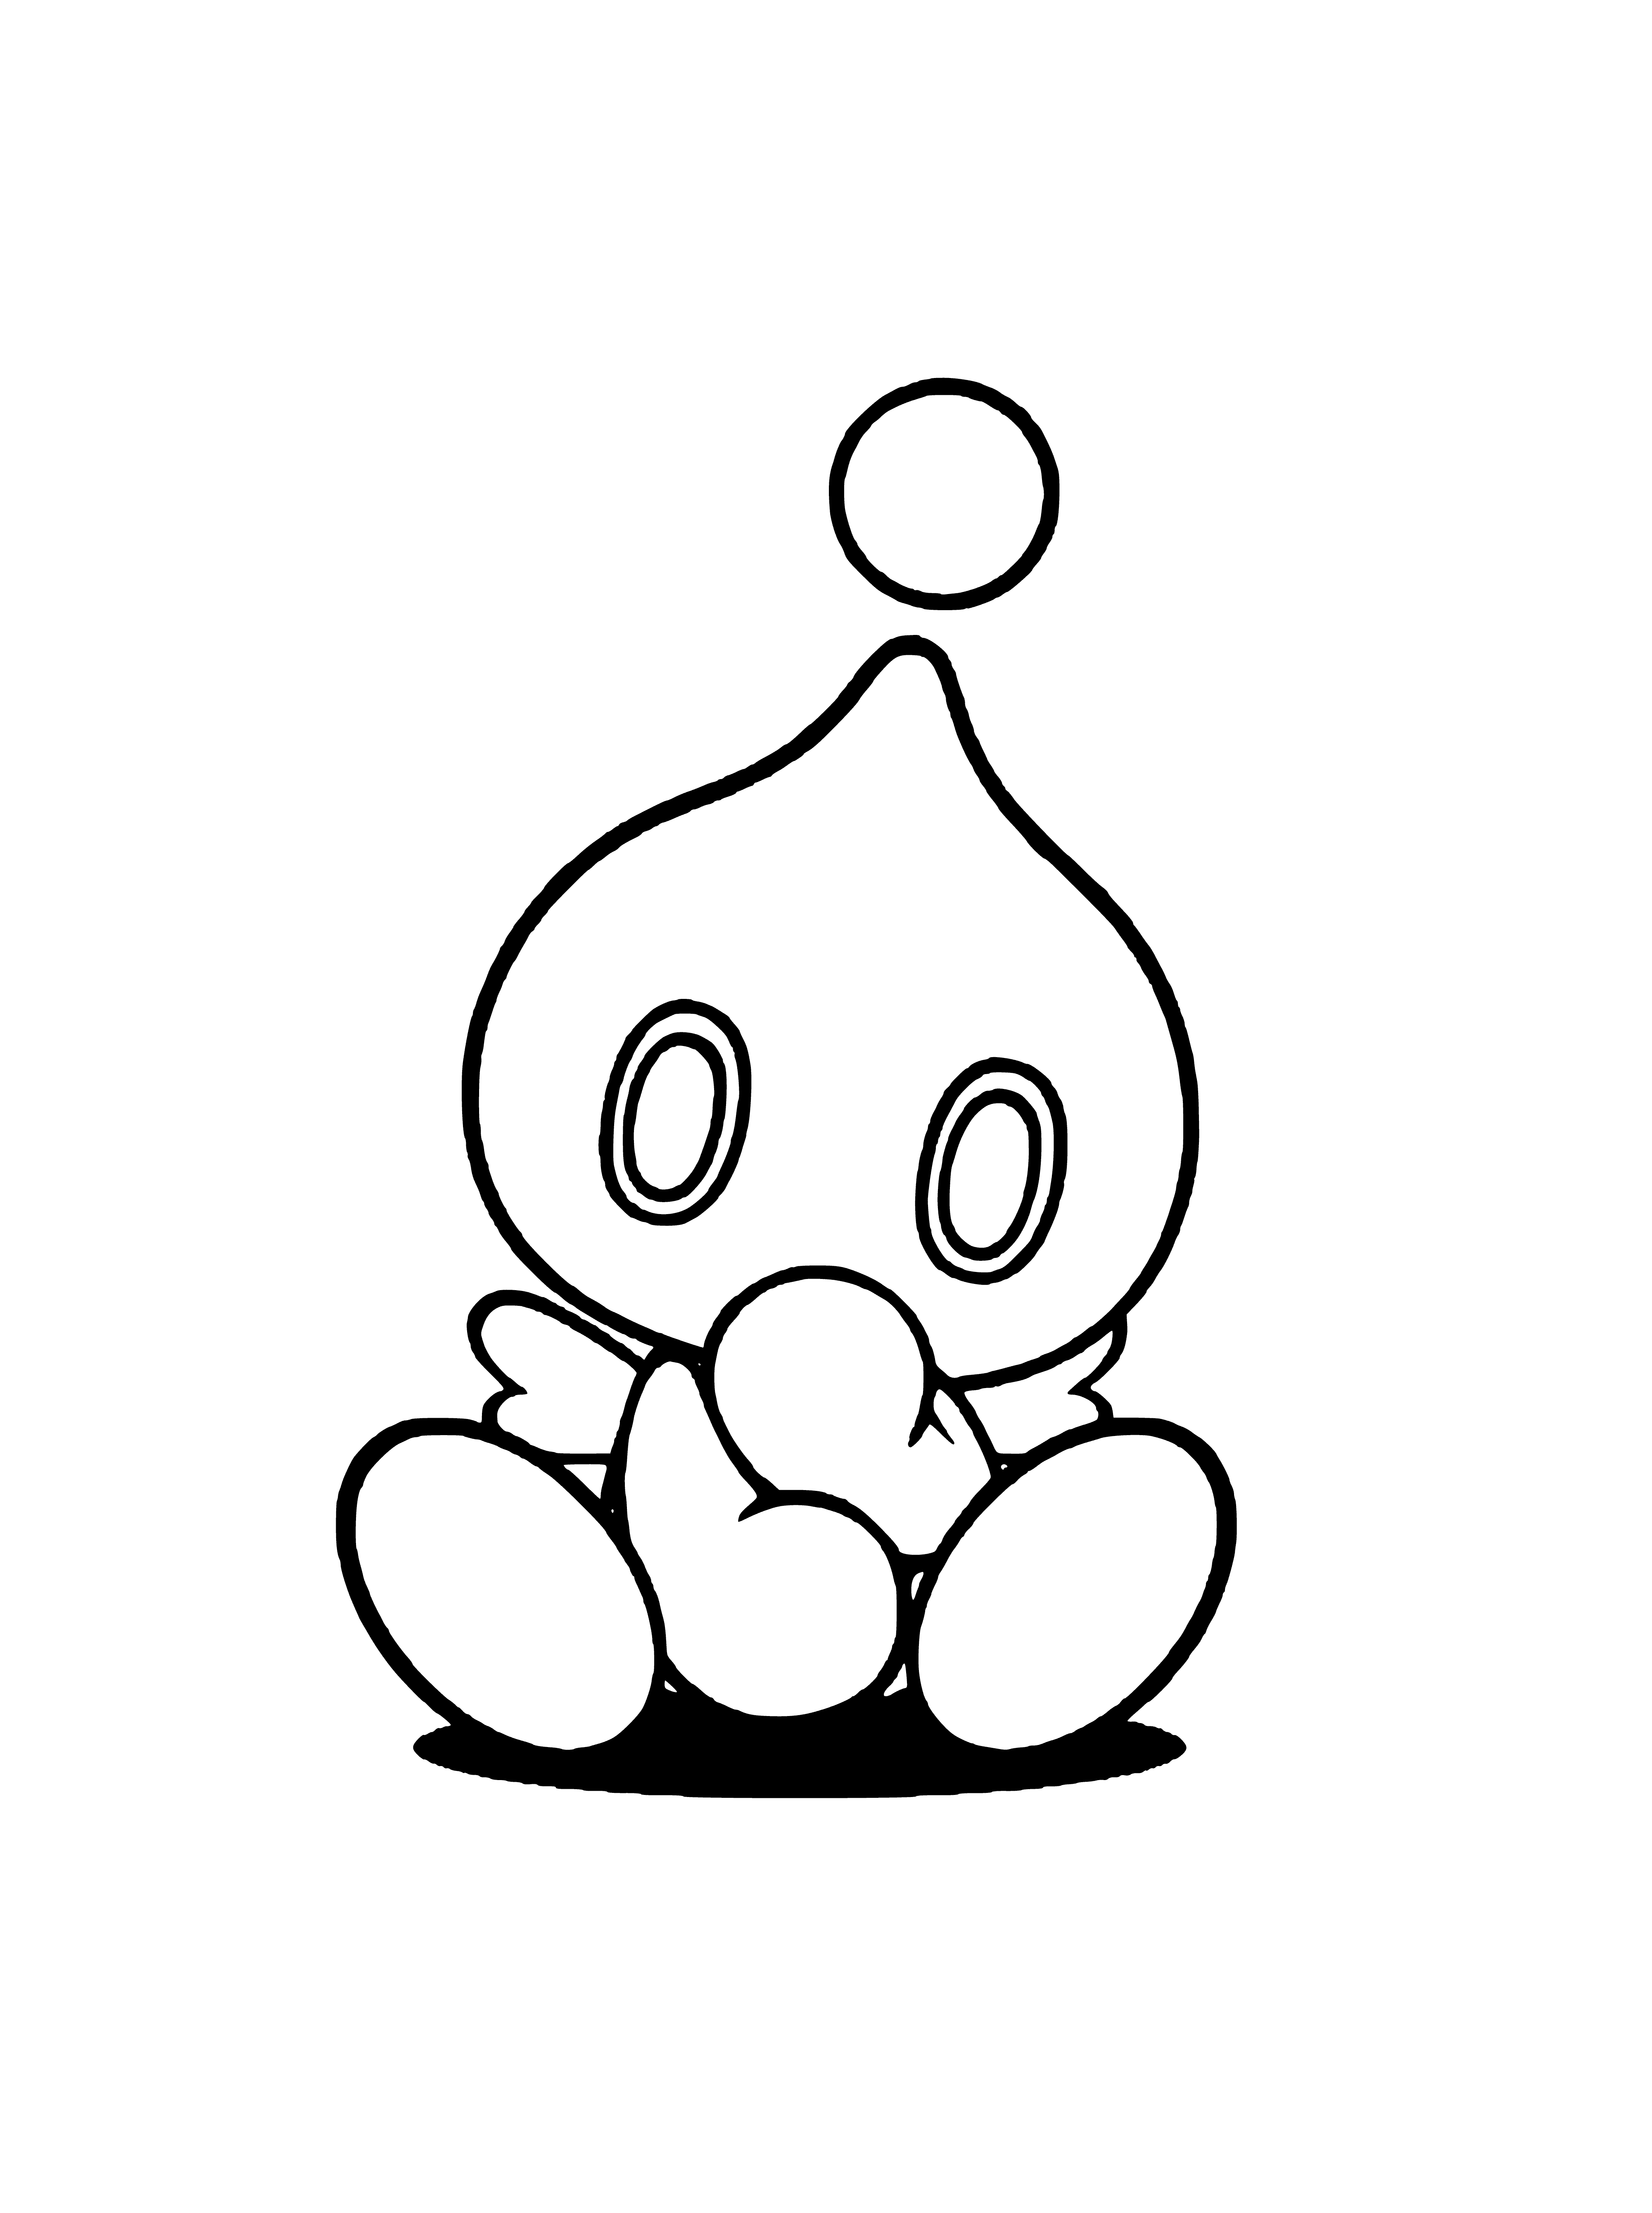 Chao Chiz coloring page